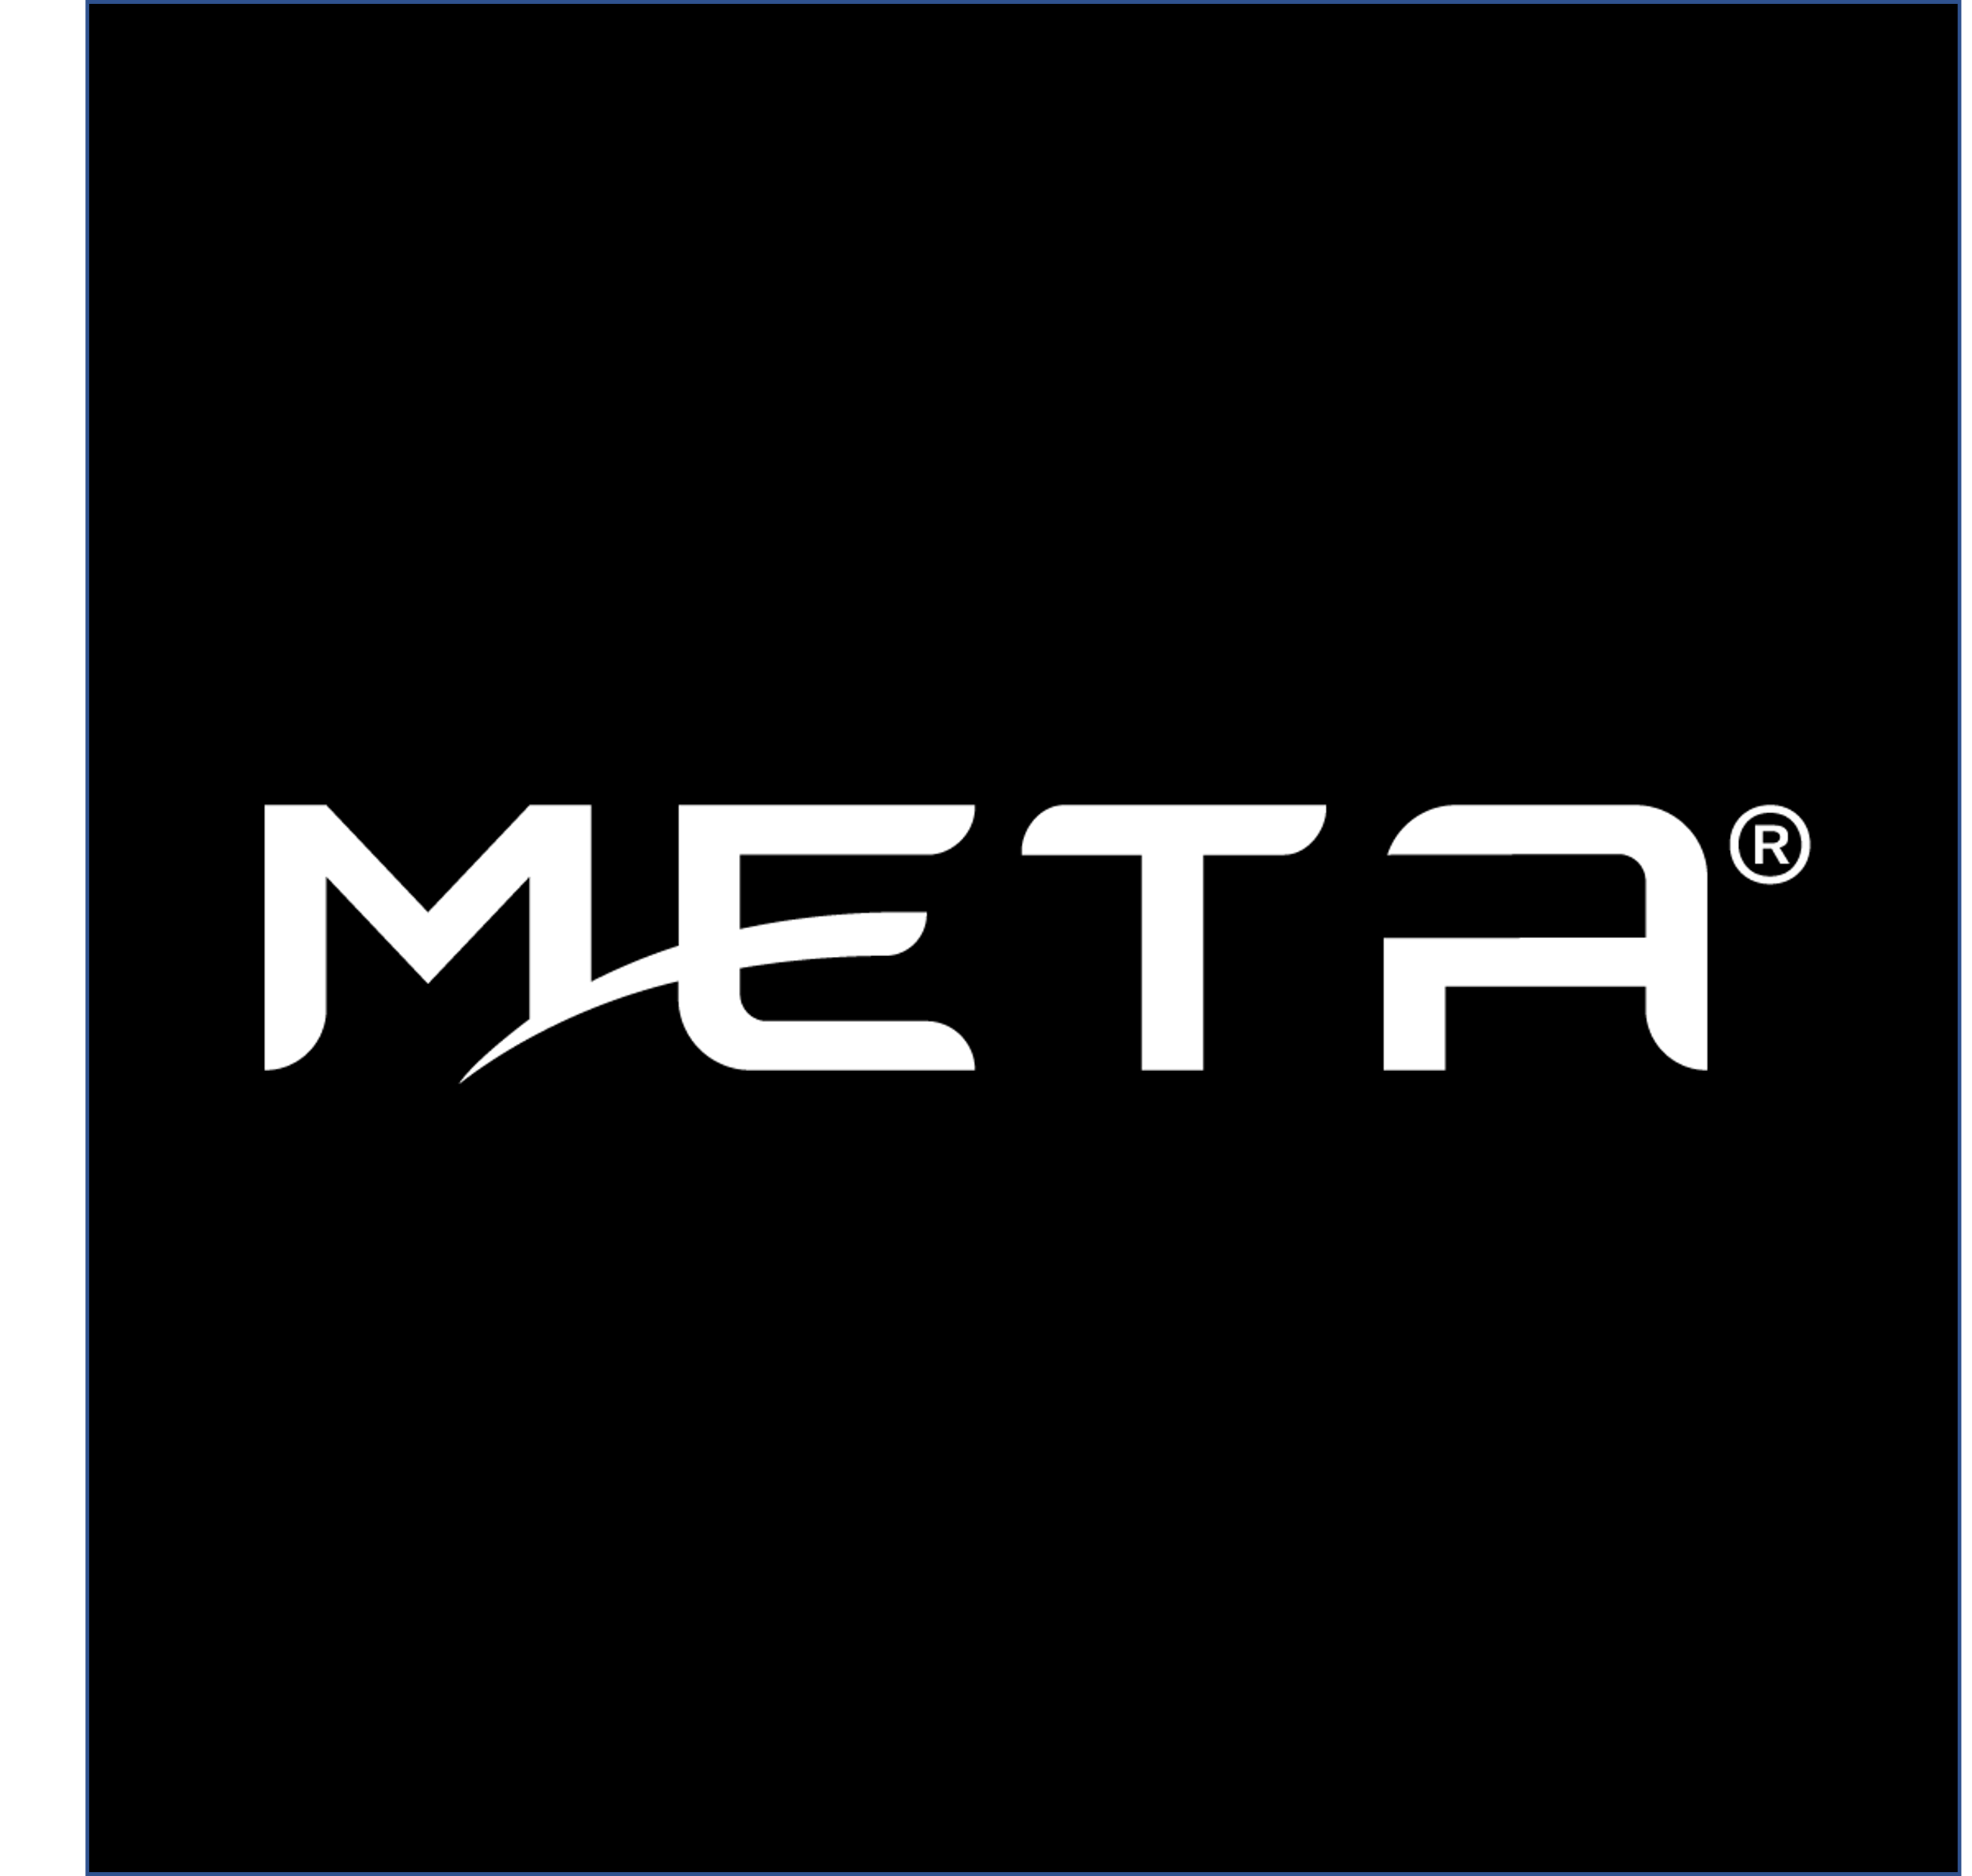 Meta Materials Inc., Thursday, August 5, 2021, Press release picture